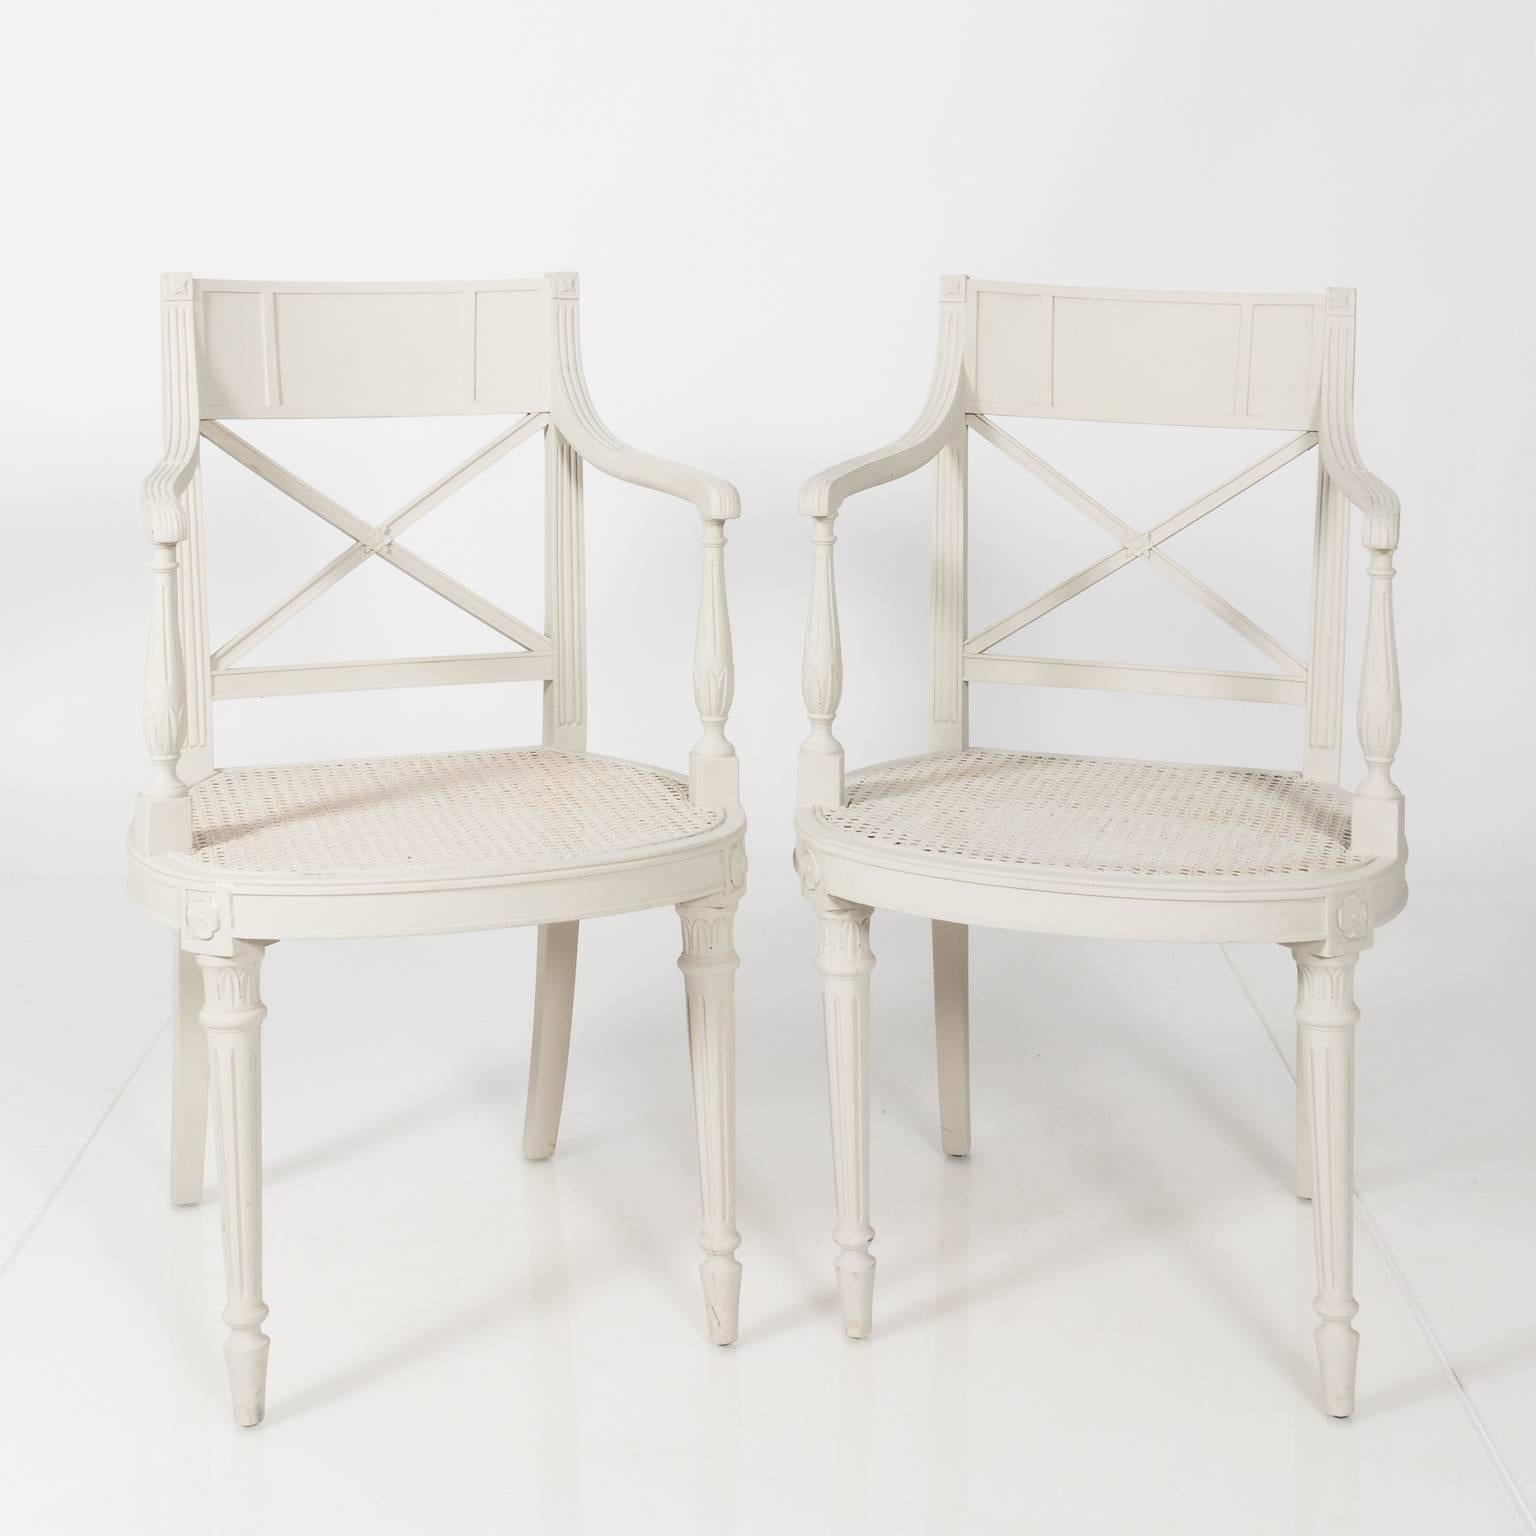 Pair of Regency style white painted chairs with caned seating and a latticework back, circa early 20th century.
 